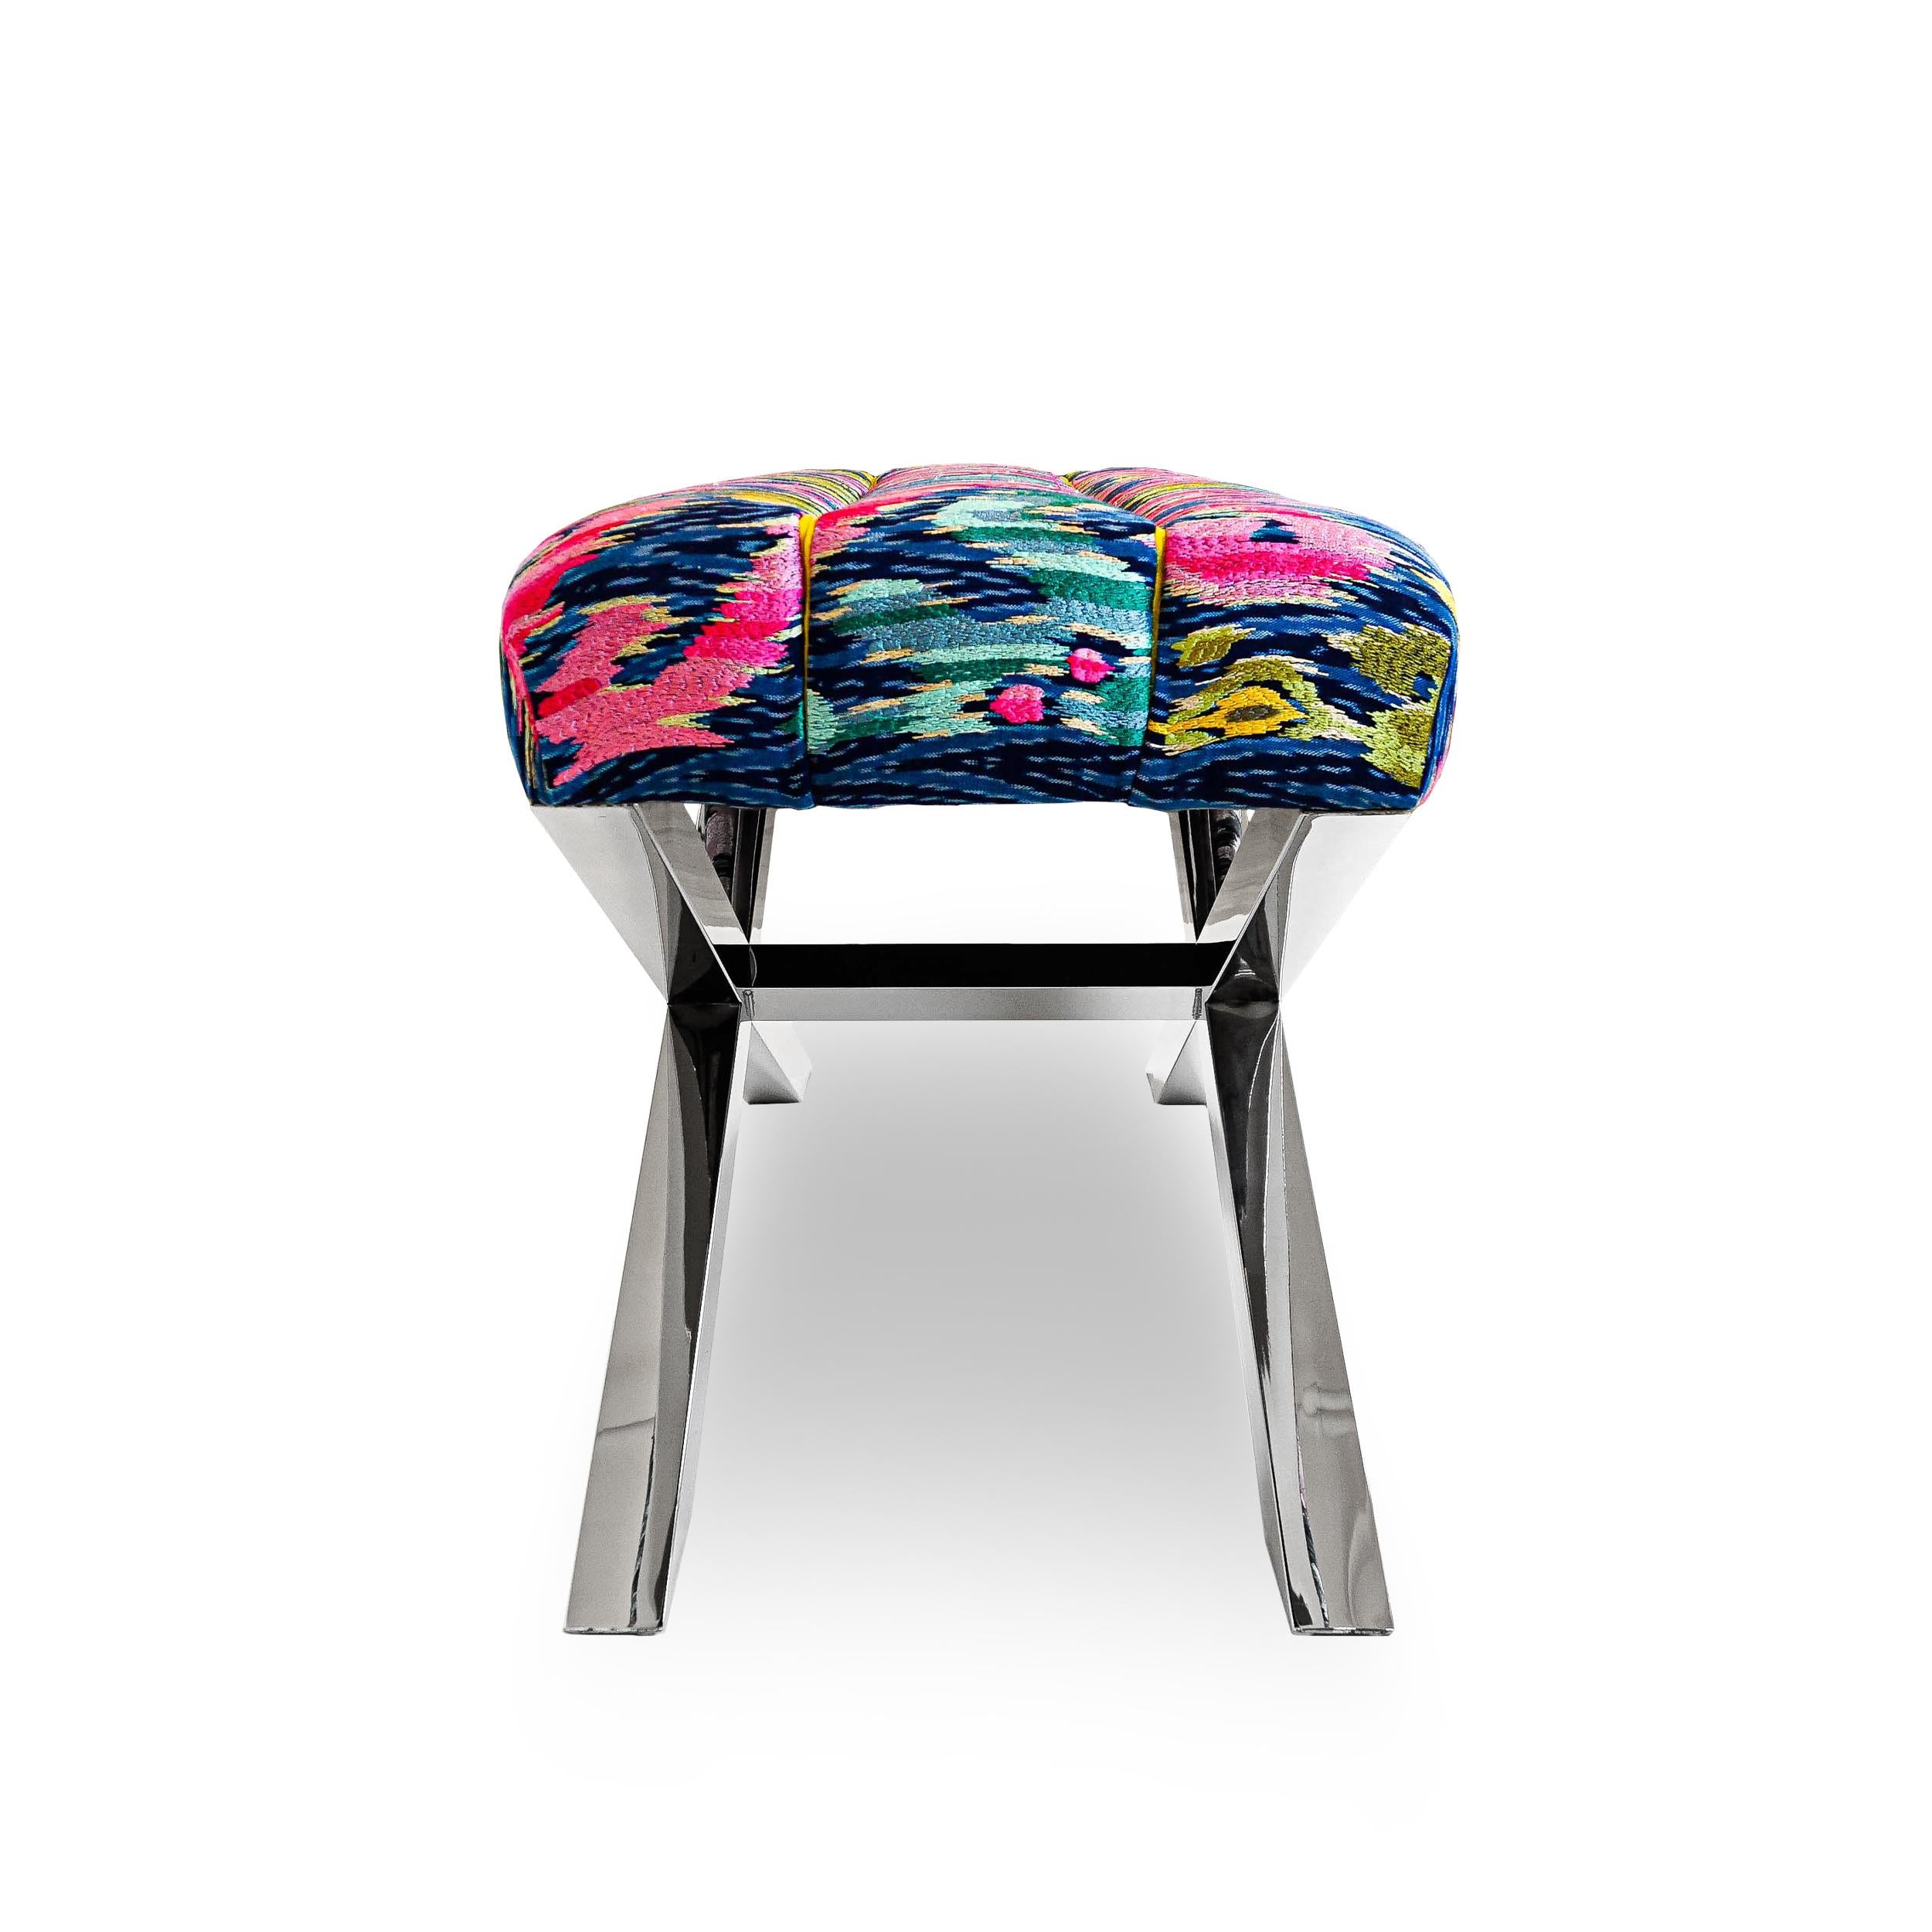 Contemporary Modern Multi-Colored Ikat Woven Fabric Bench with X Crossed Legs